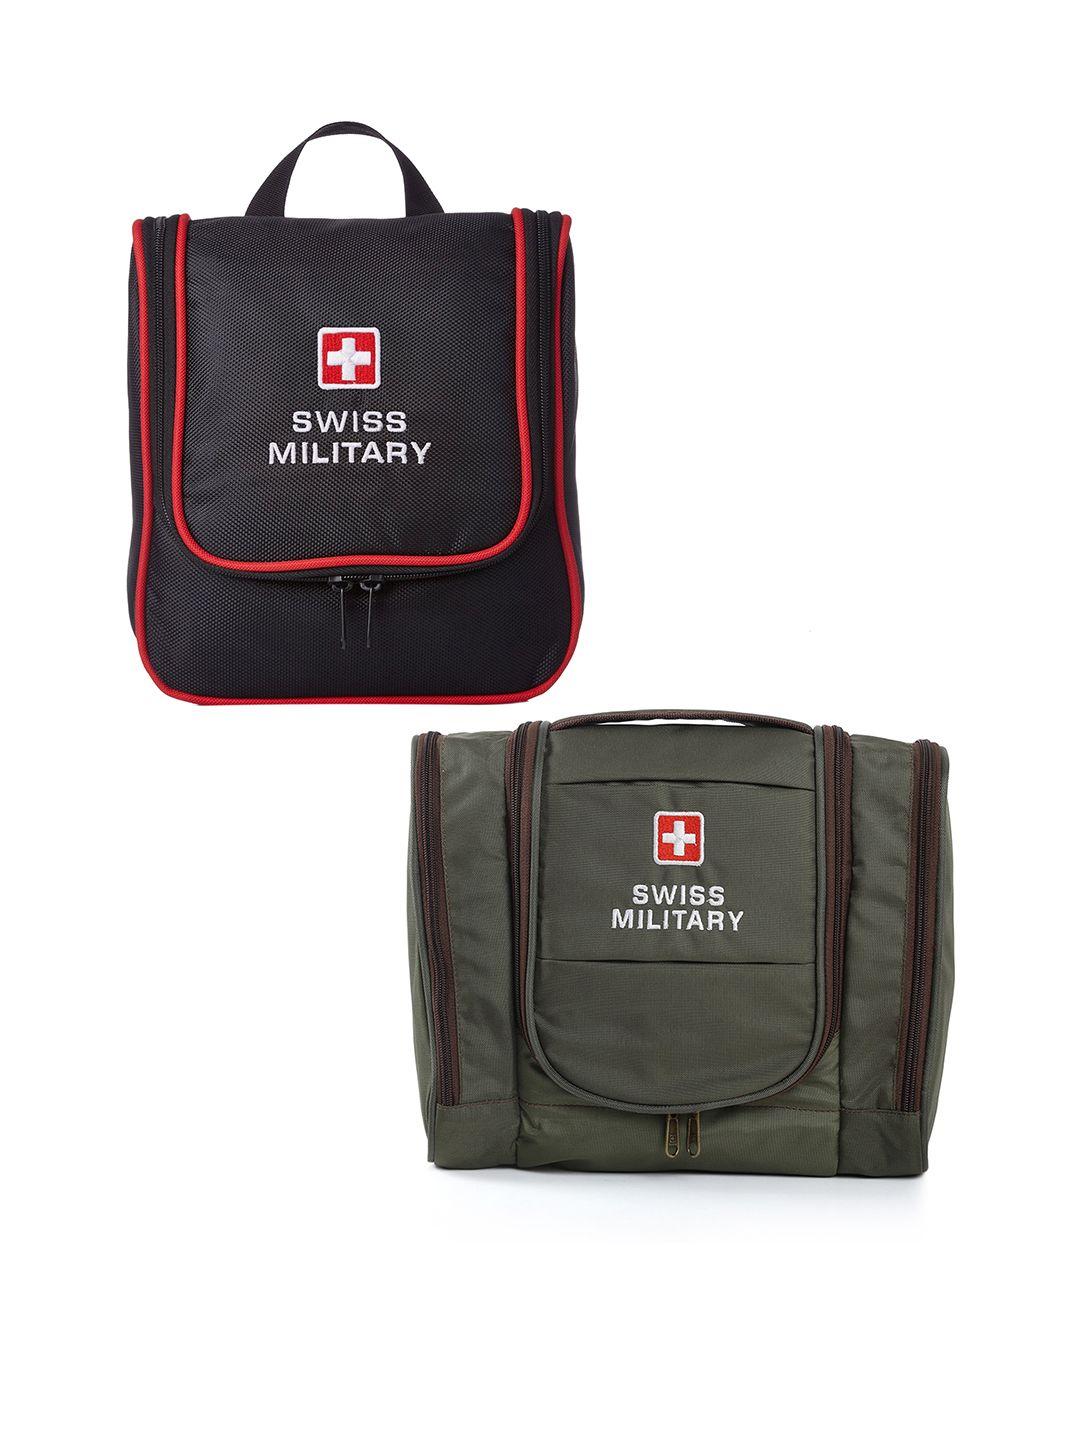 swiss military pack of 2 water resistant travel toiletry bags